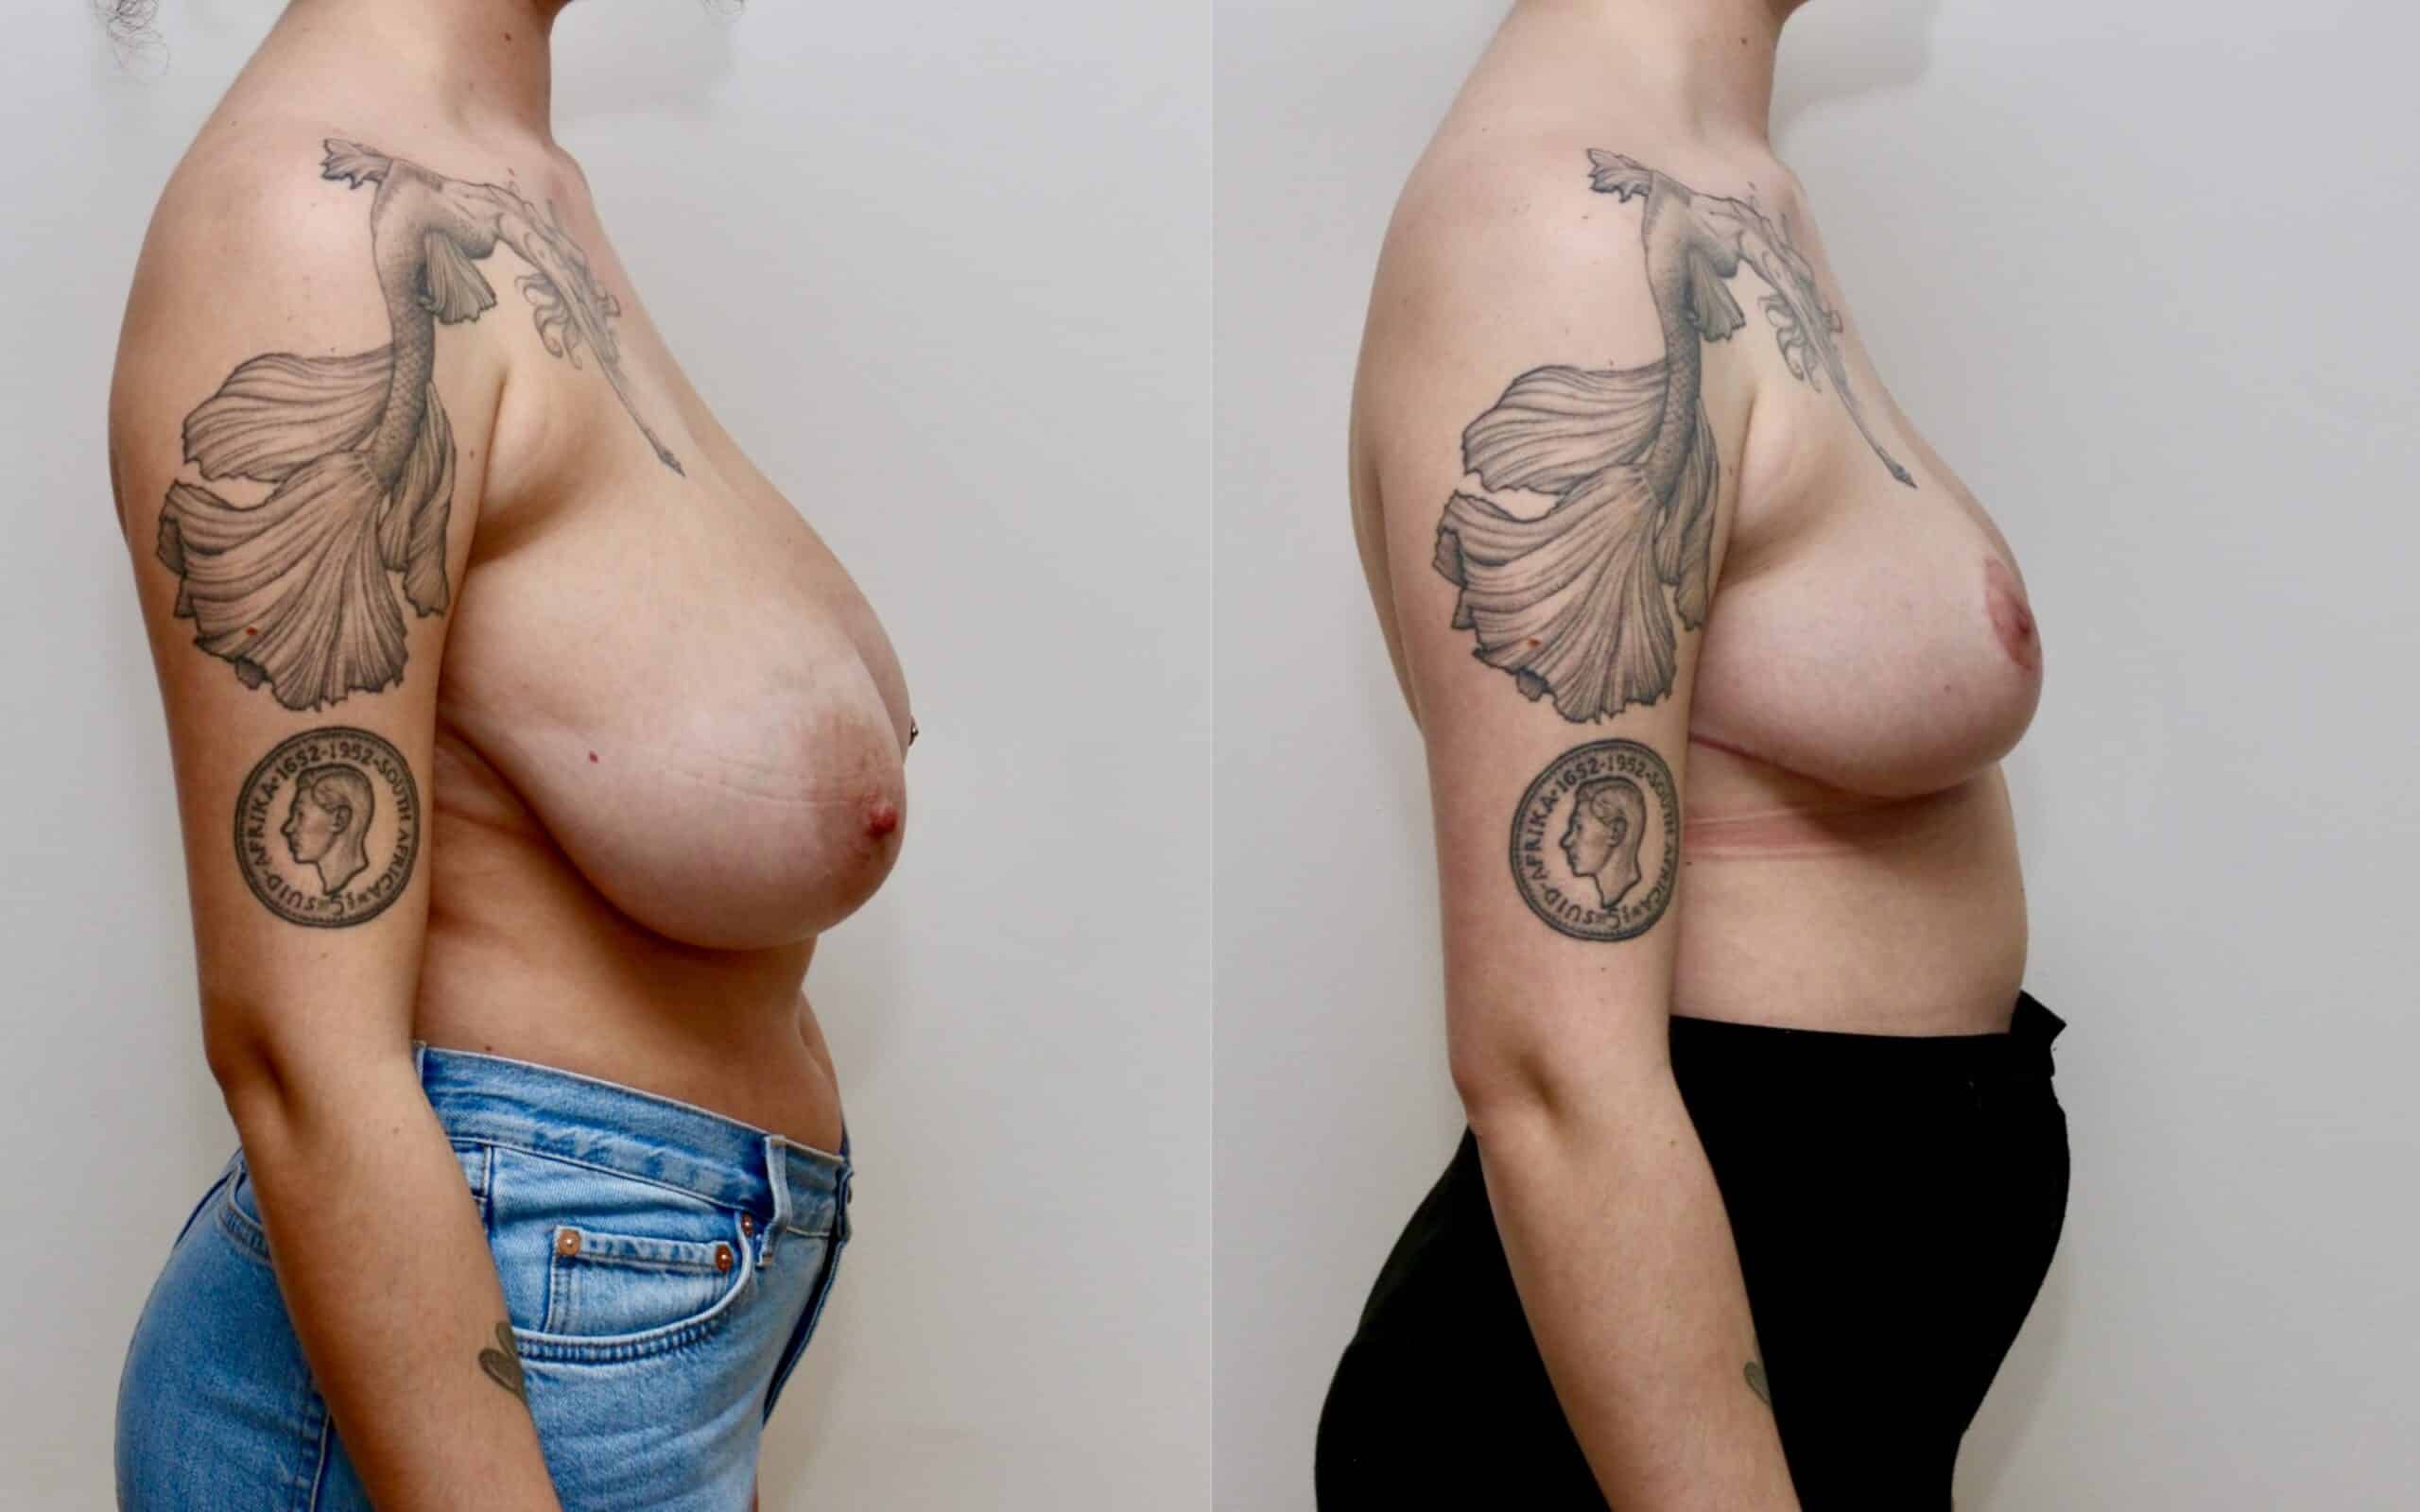 Large breast reduction in patient in early 20s